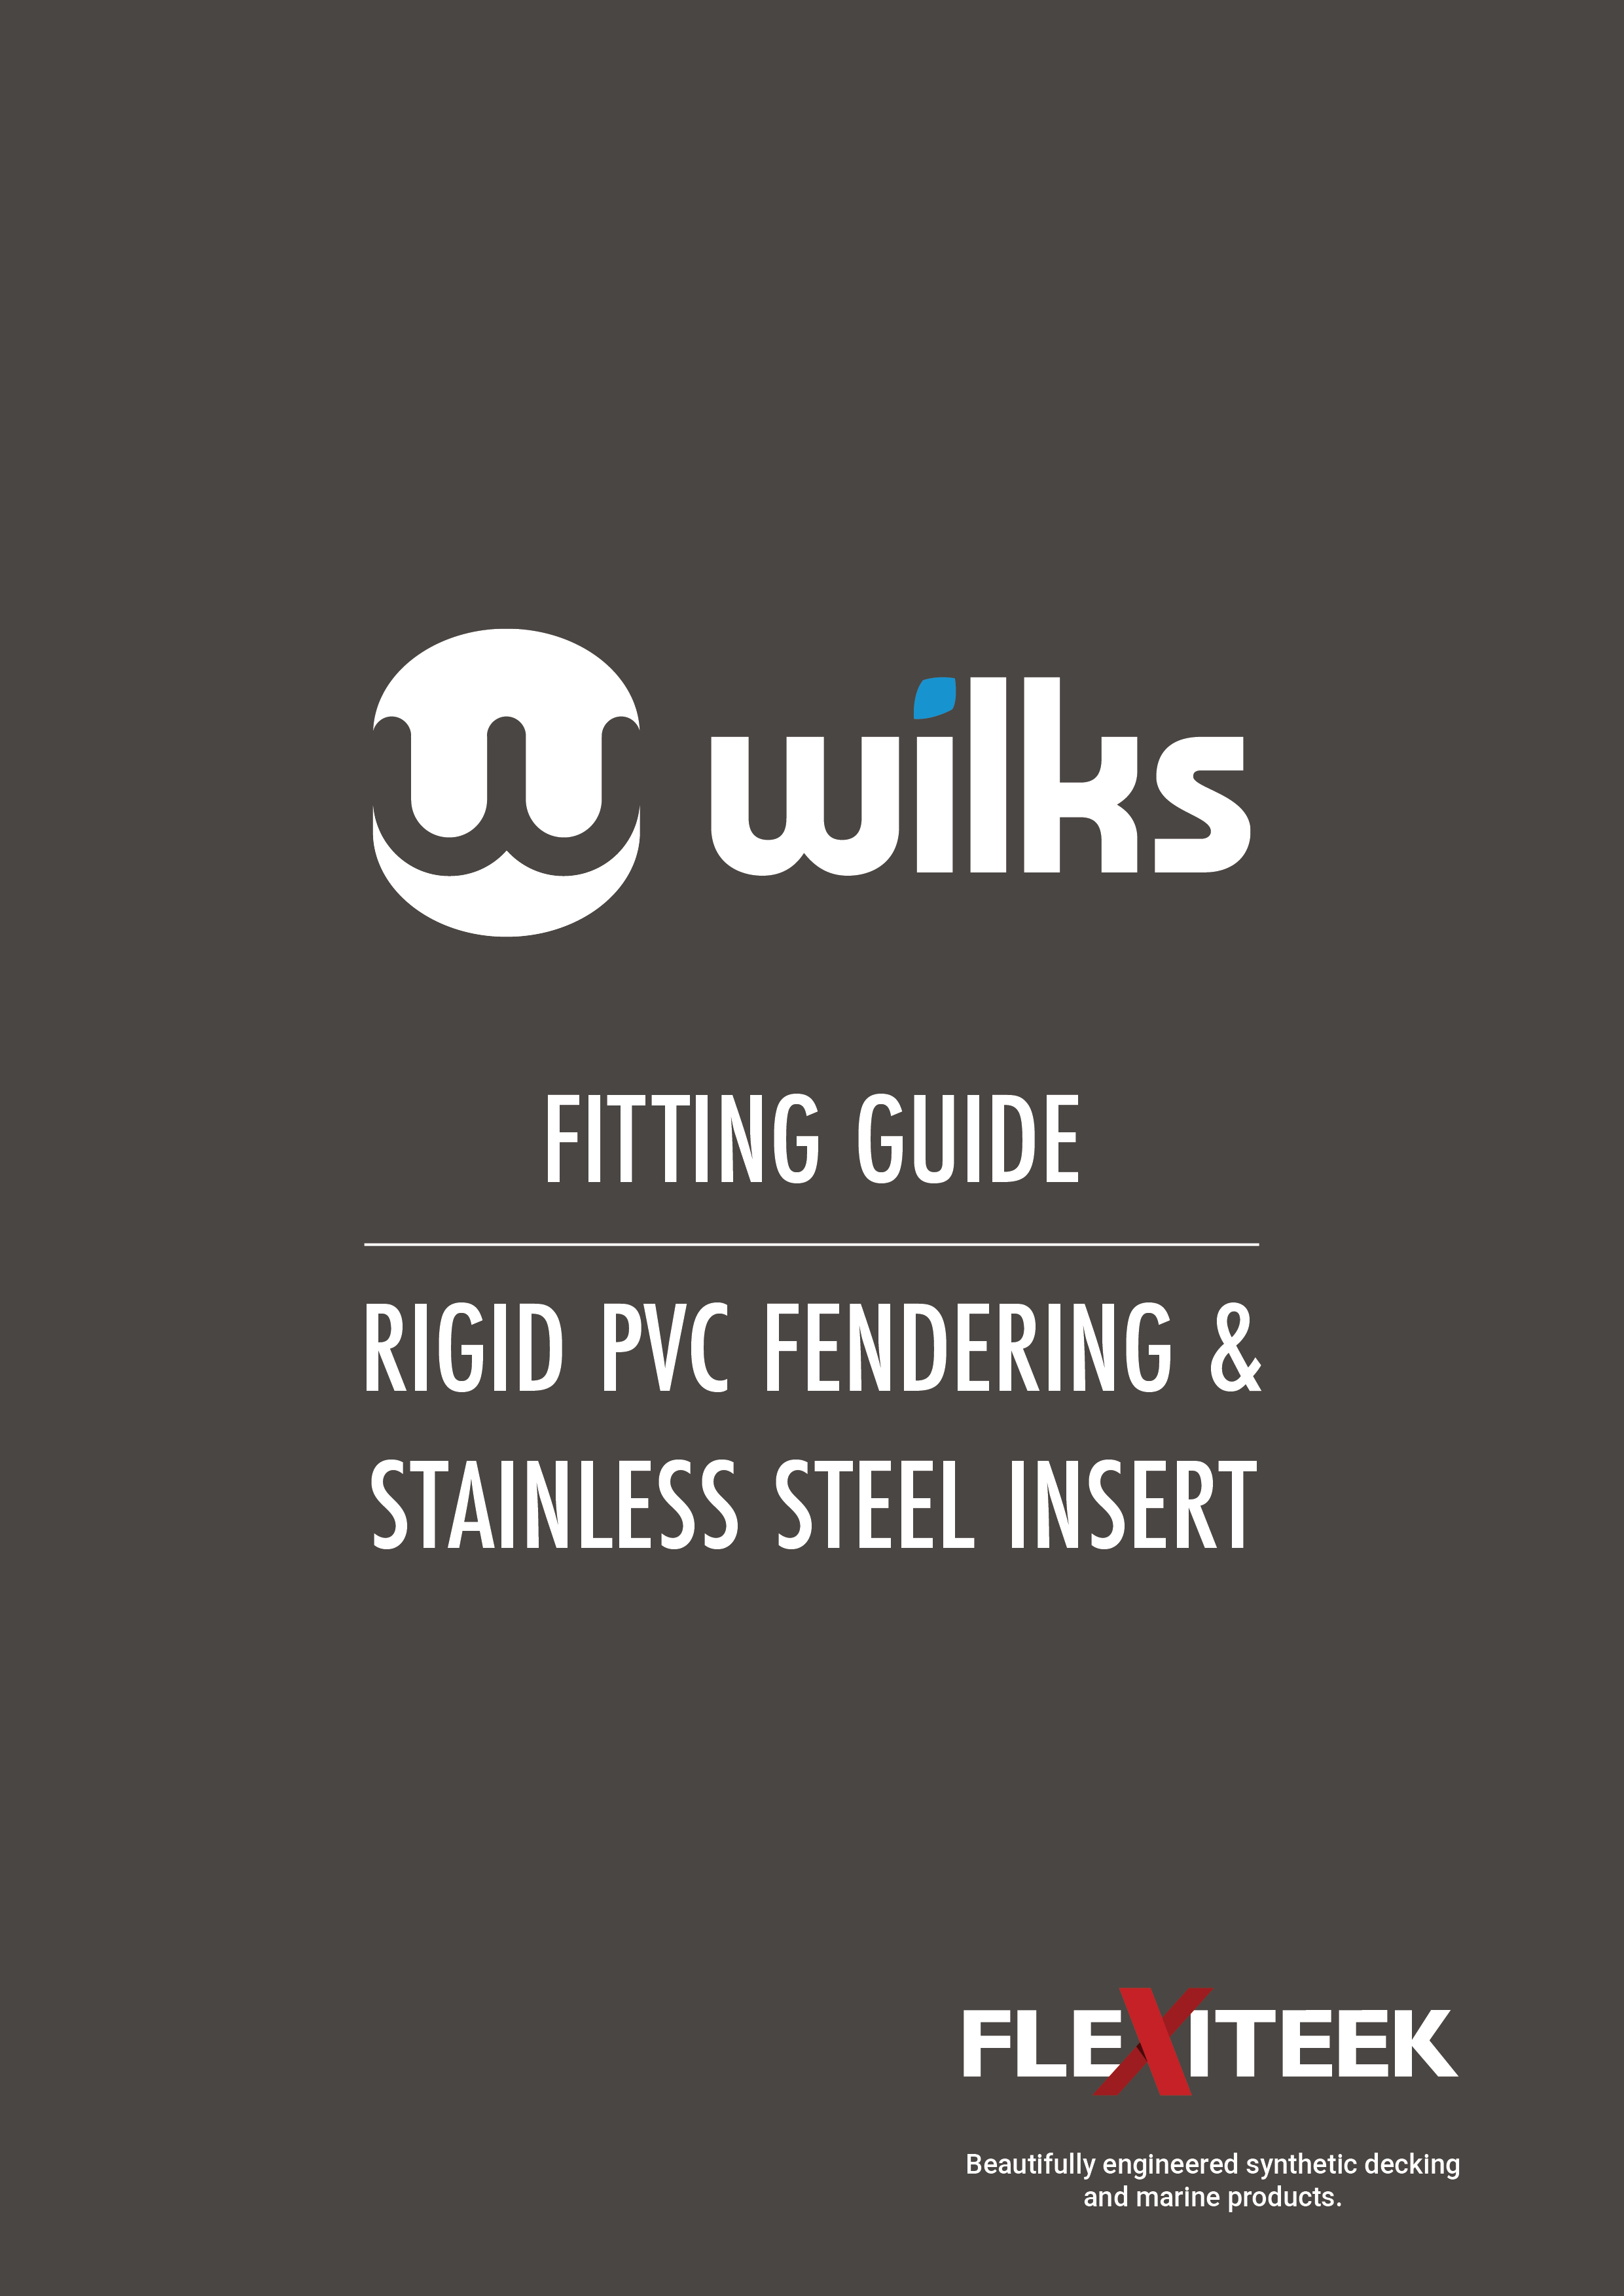 Rigid PVC fendering and stainless steel insert